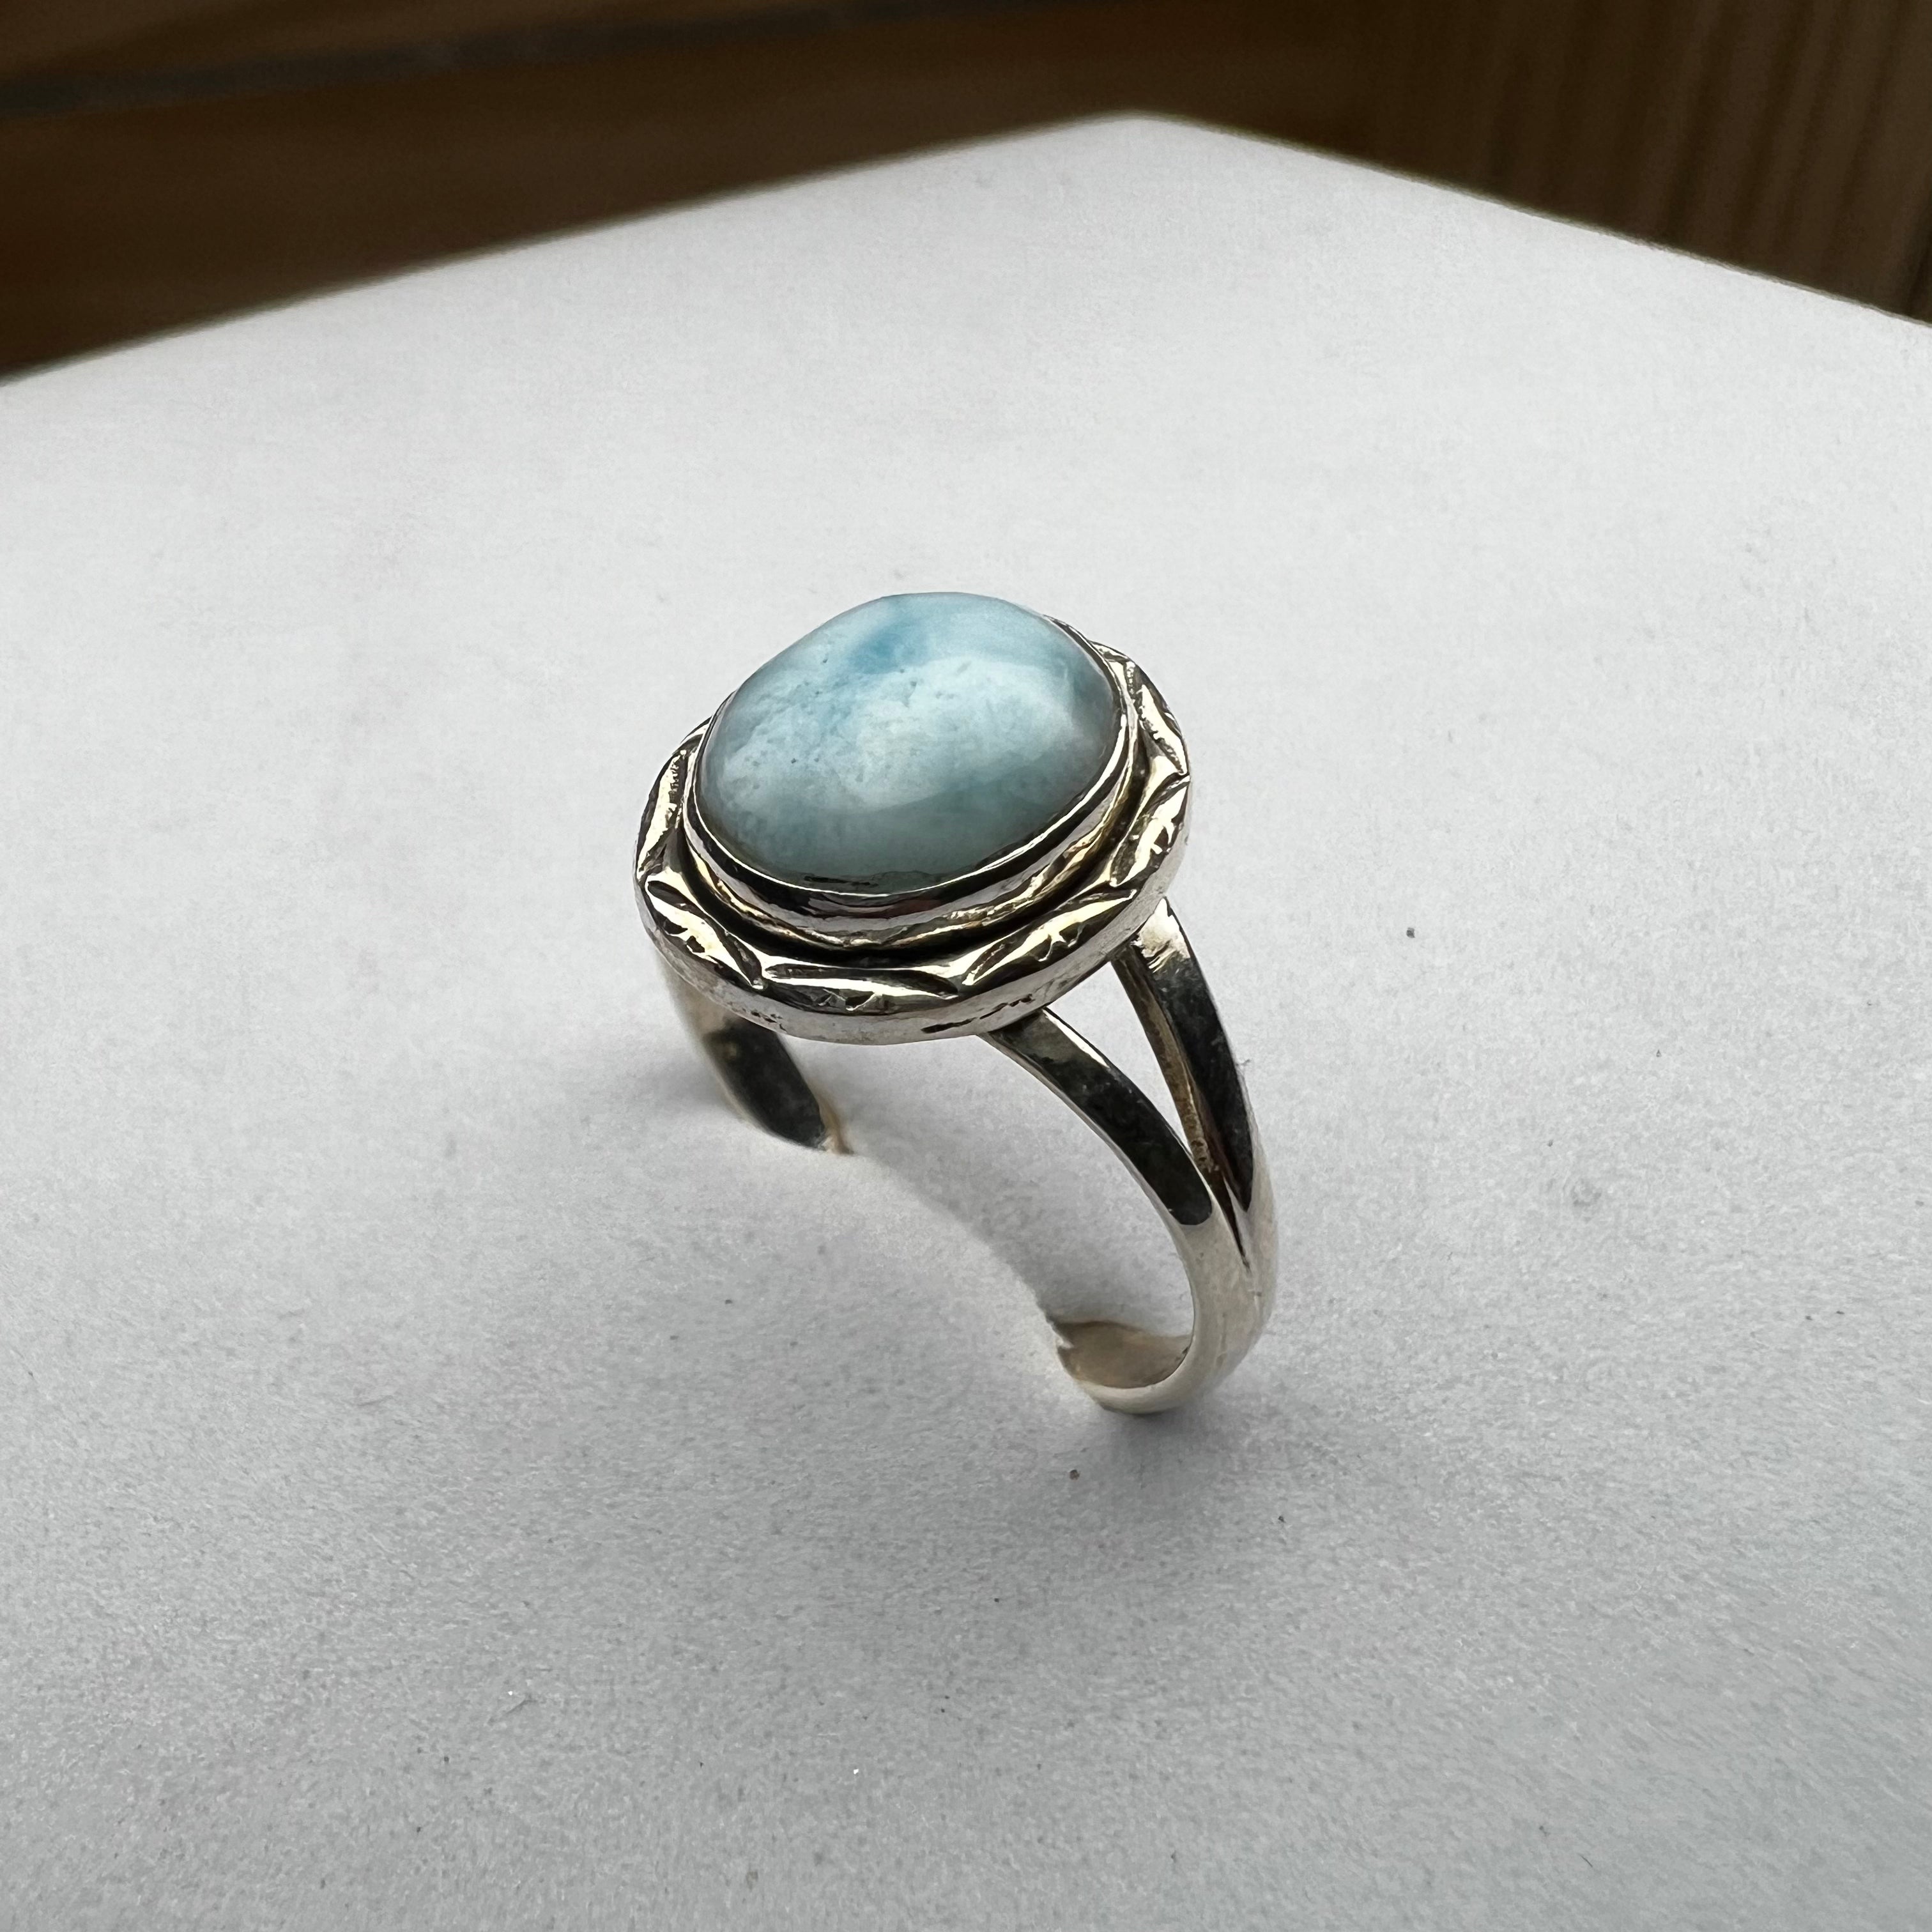 HANDCRAFTED LARIMAR RING IN
SILVER 925 (SIZE 8)